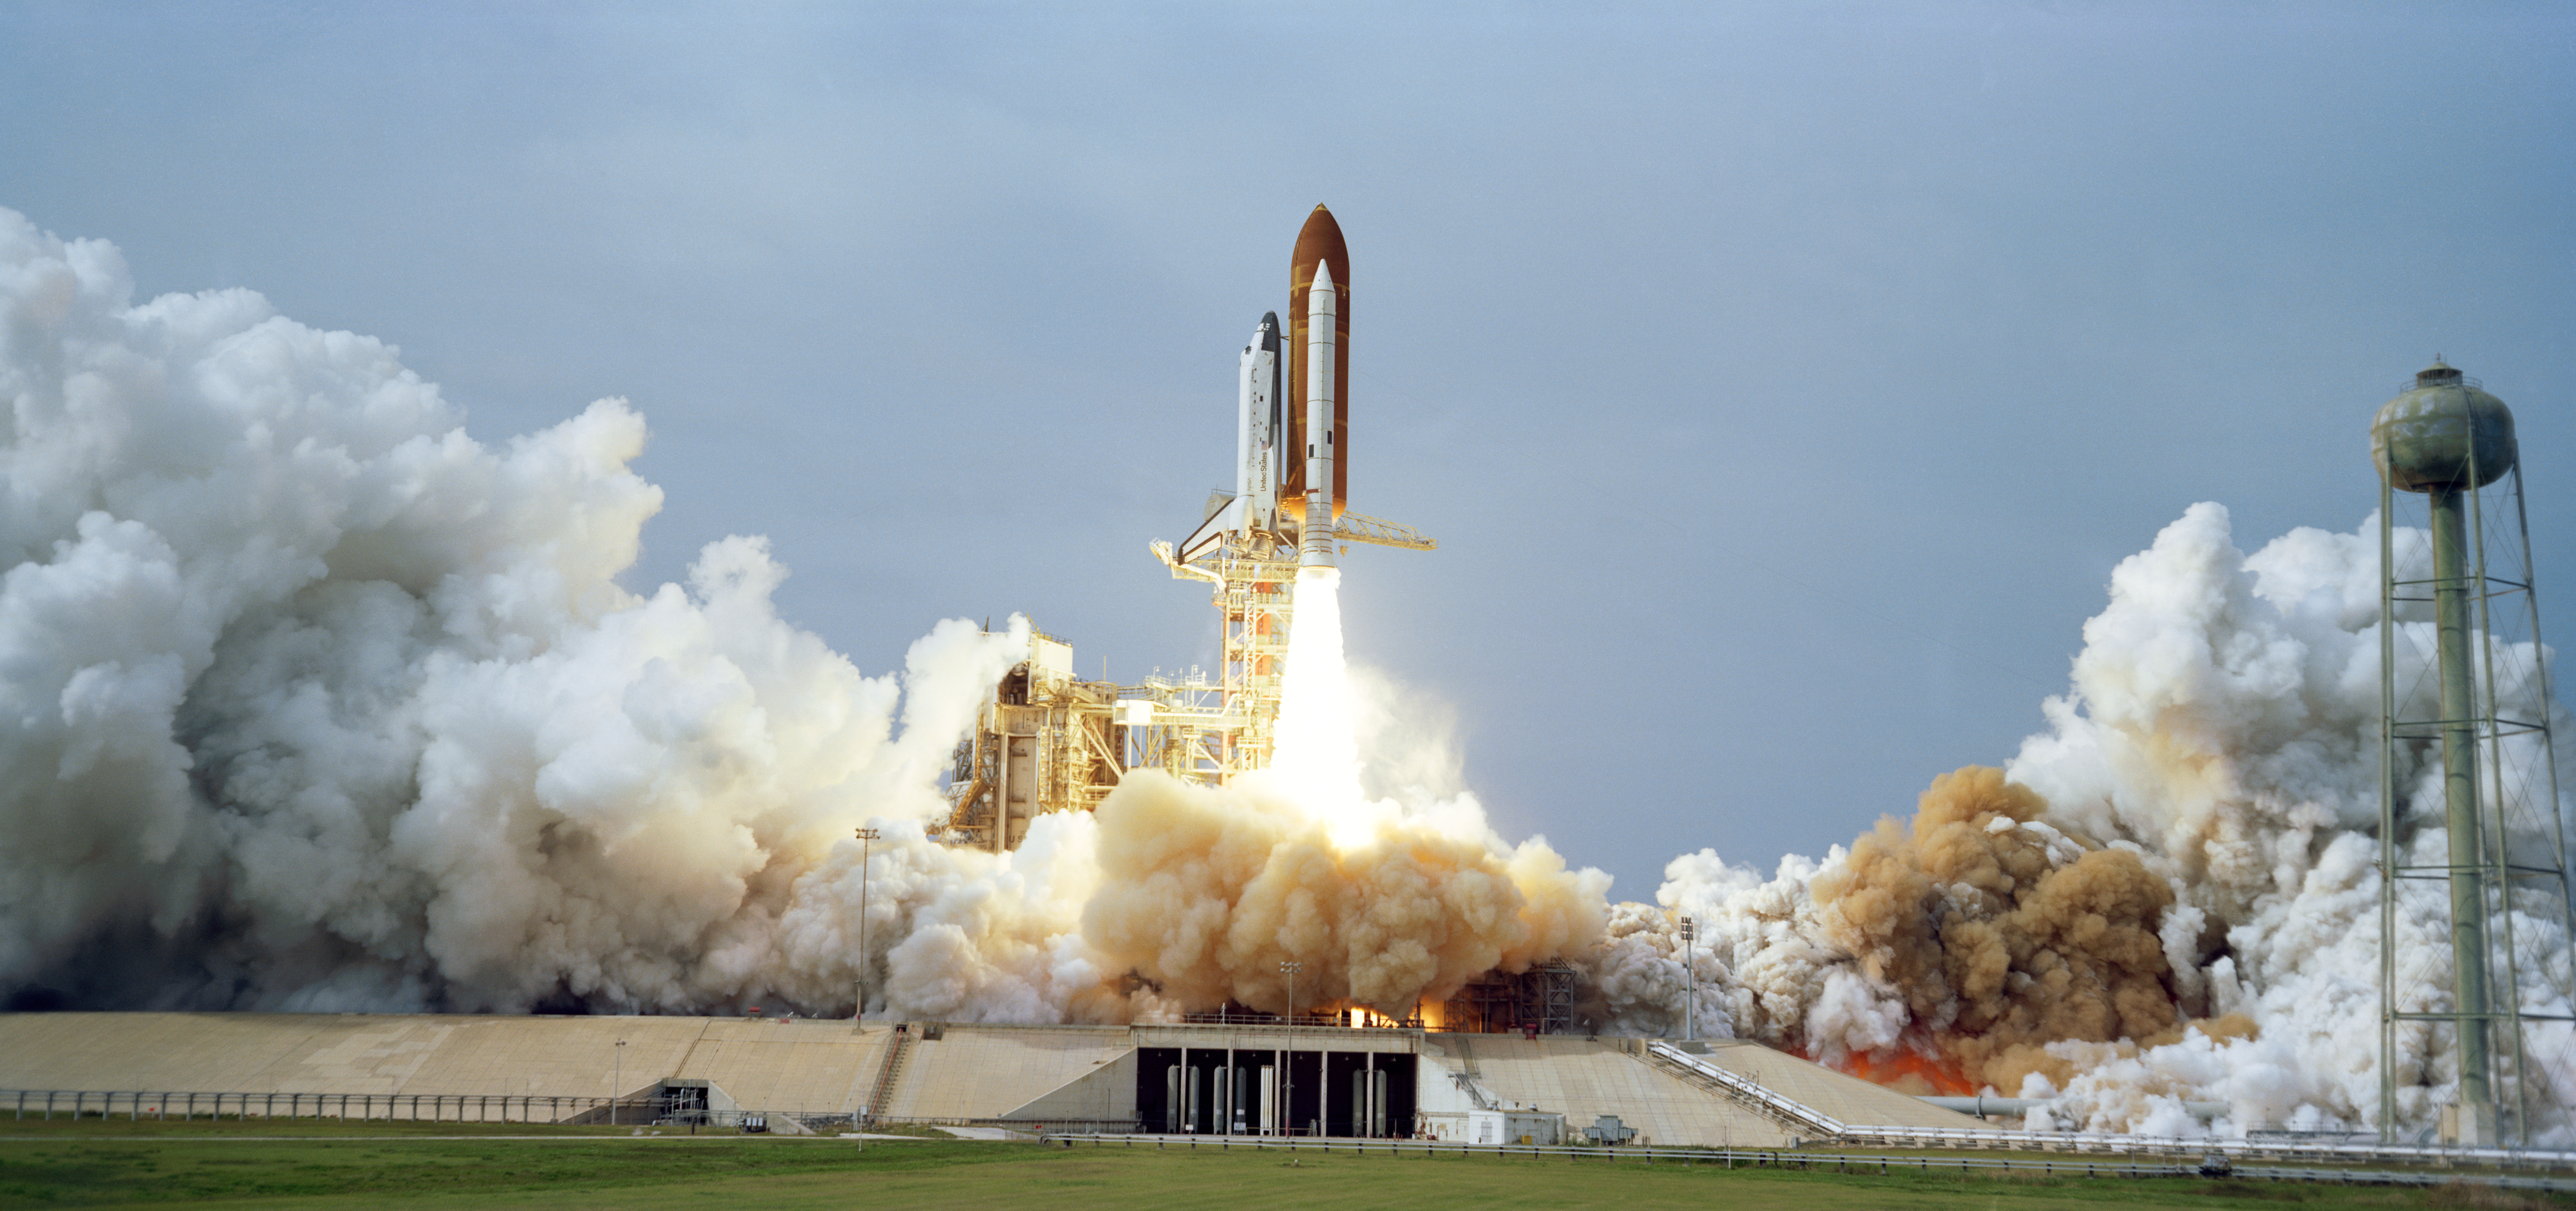 -Liftoff of space shuttle Columbia on STS-9 carrying the first Spacelab science module